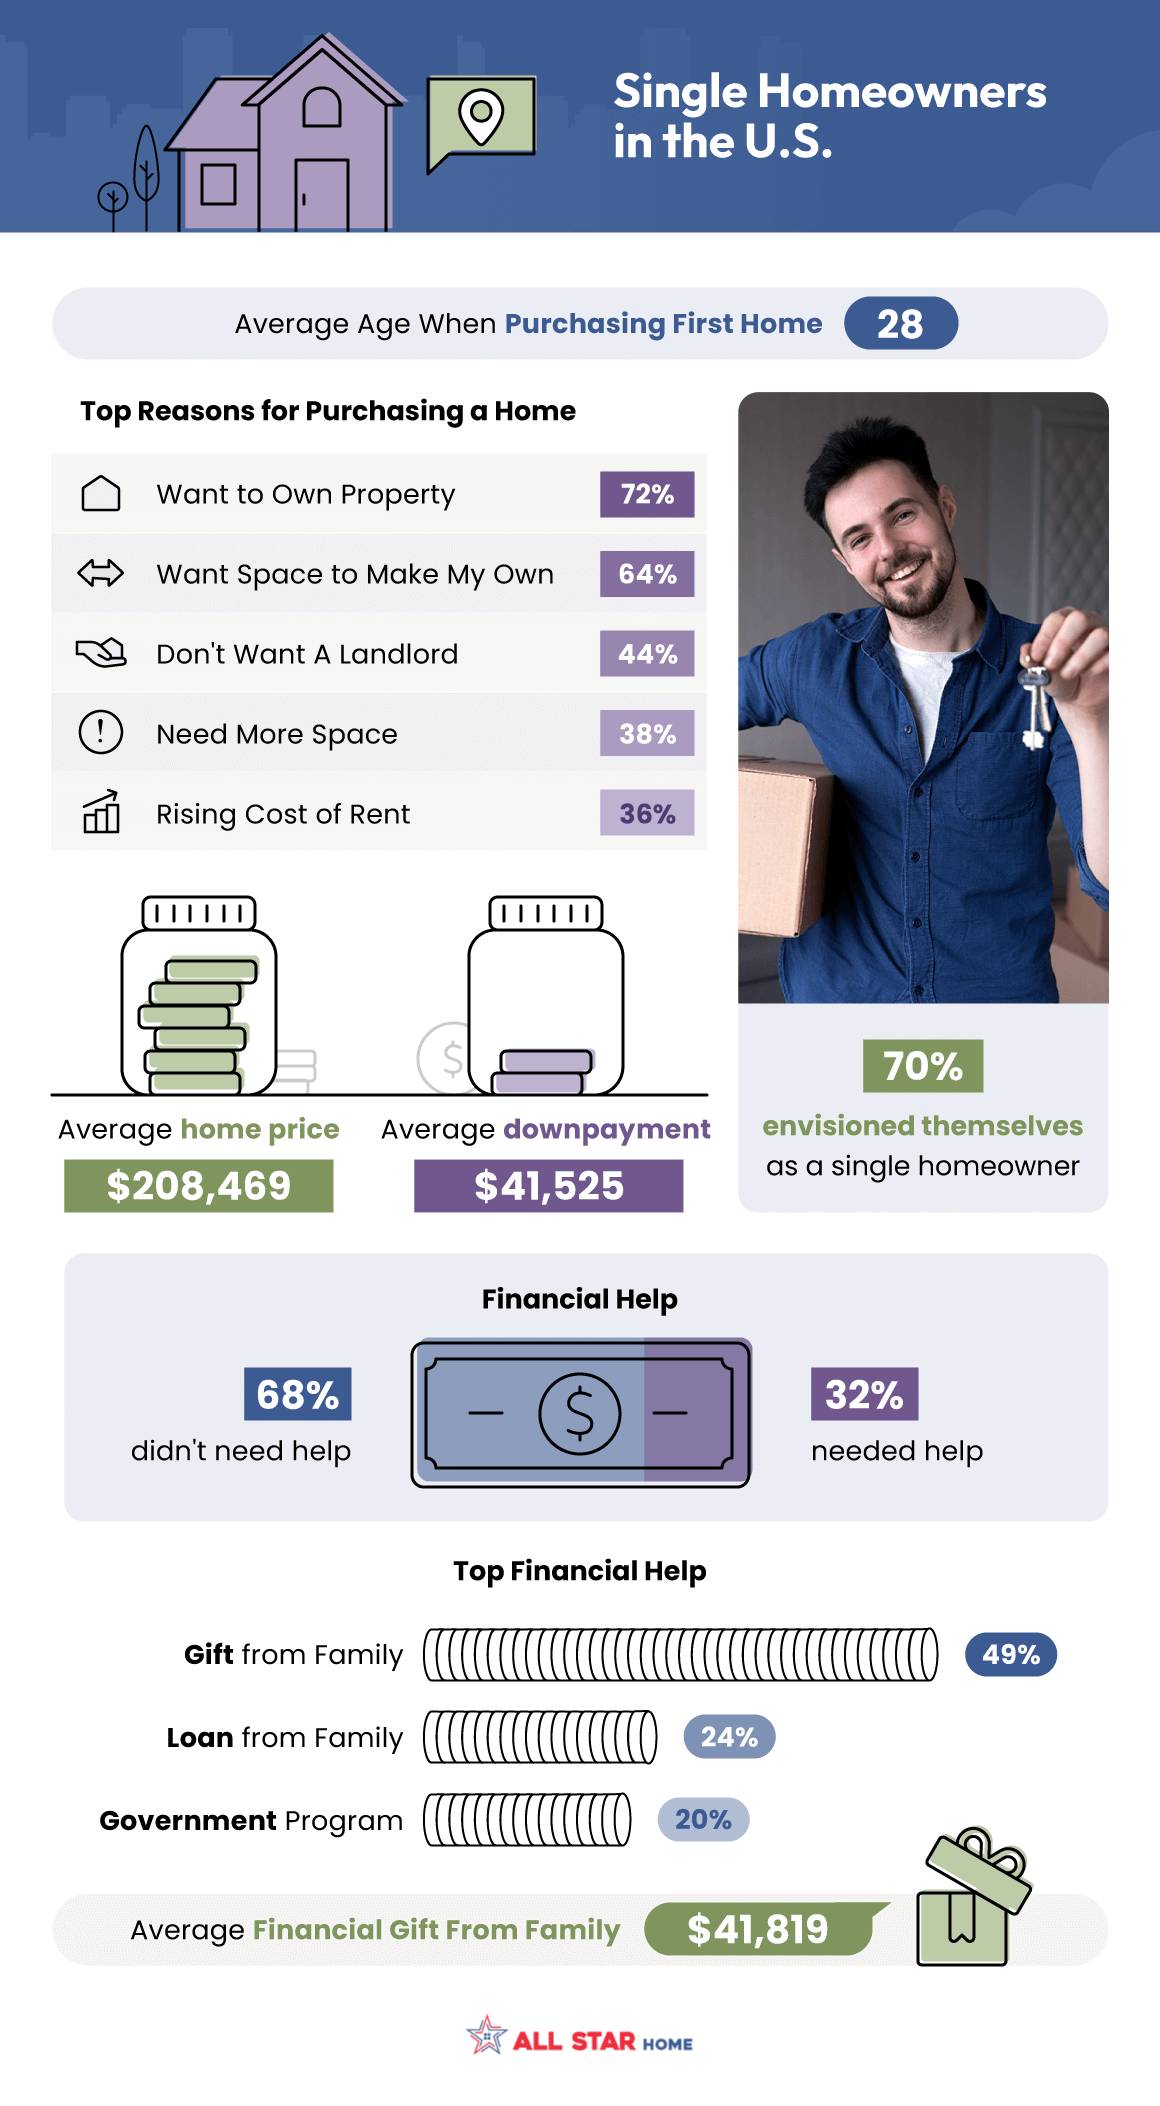 Top 5 Reasons Single Homeowners buy a home - survey and infographic from AllStarHome.com